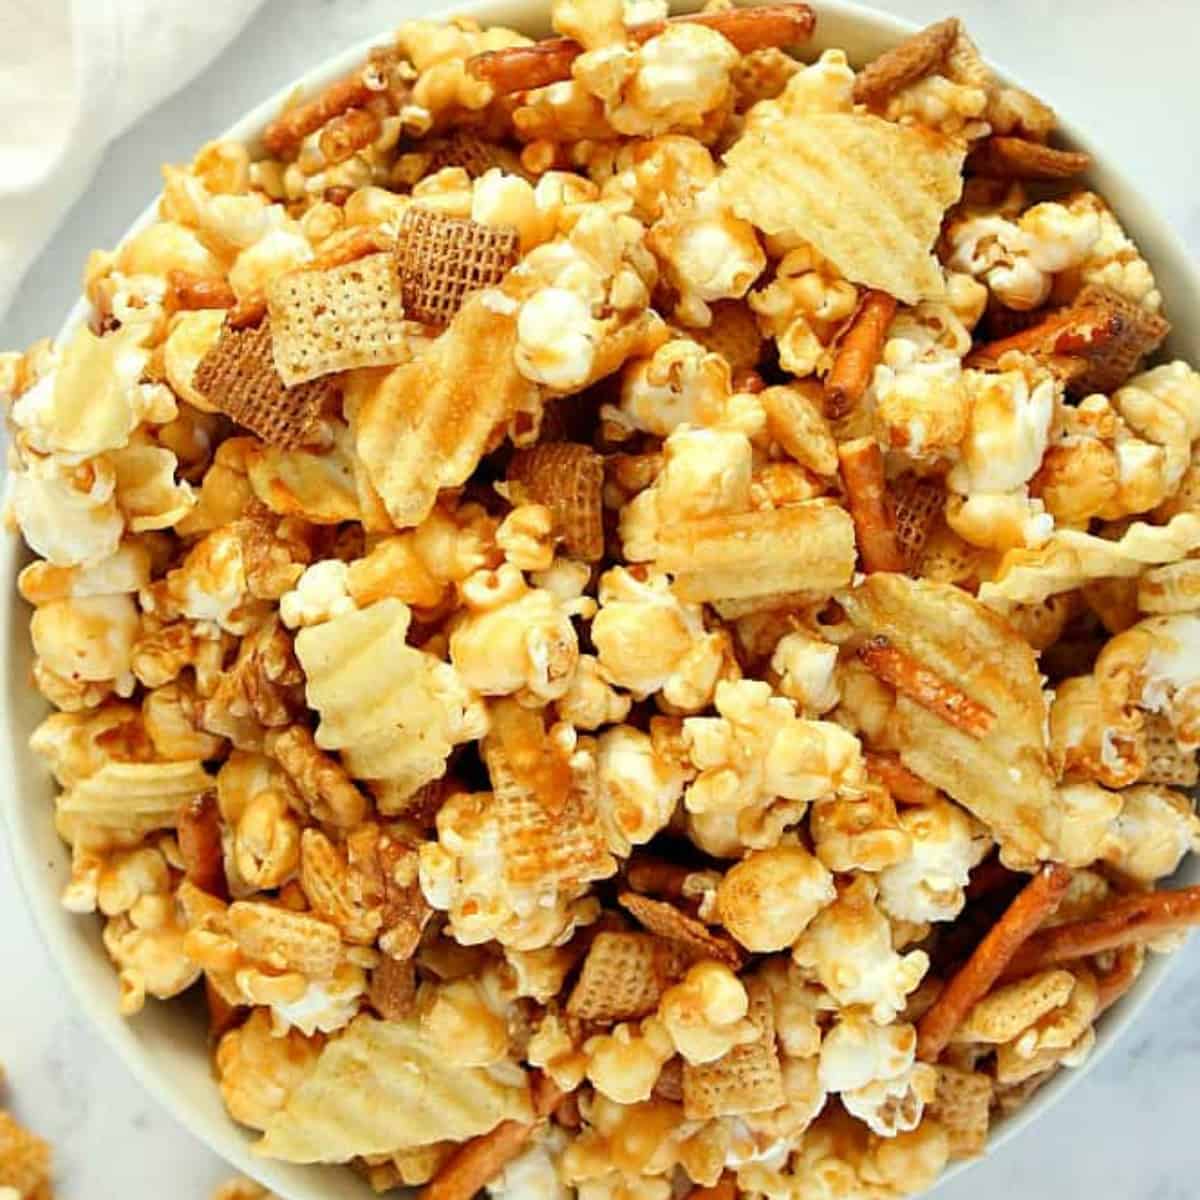 Popcorn mix in a bowl.